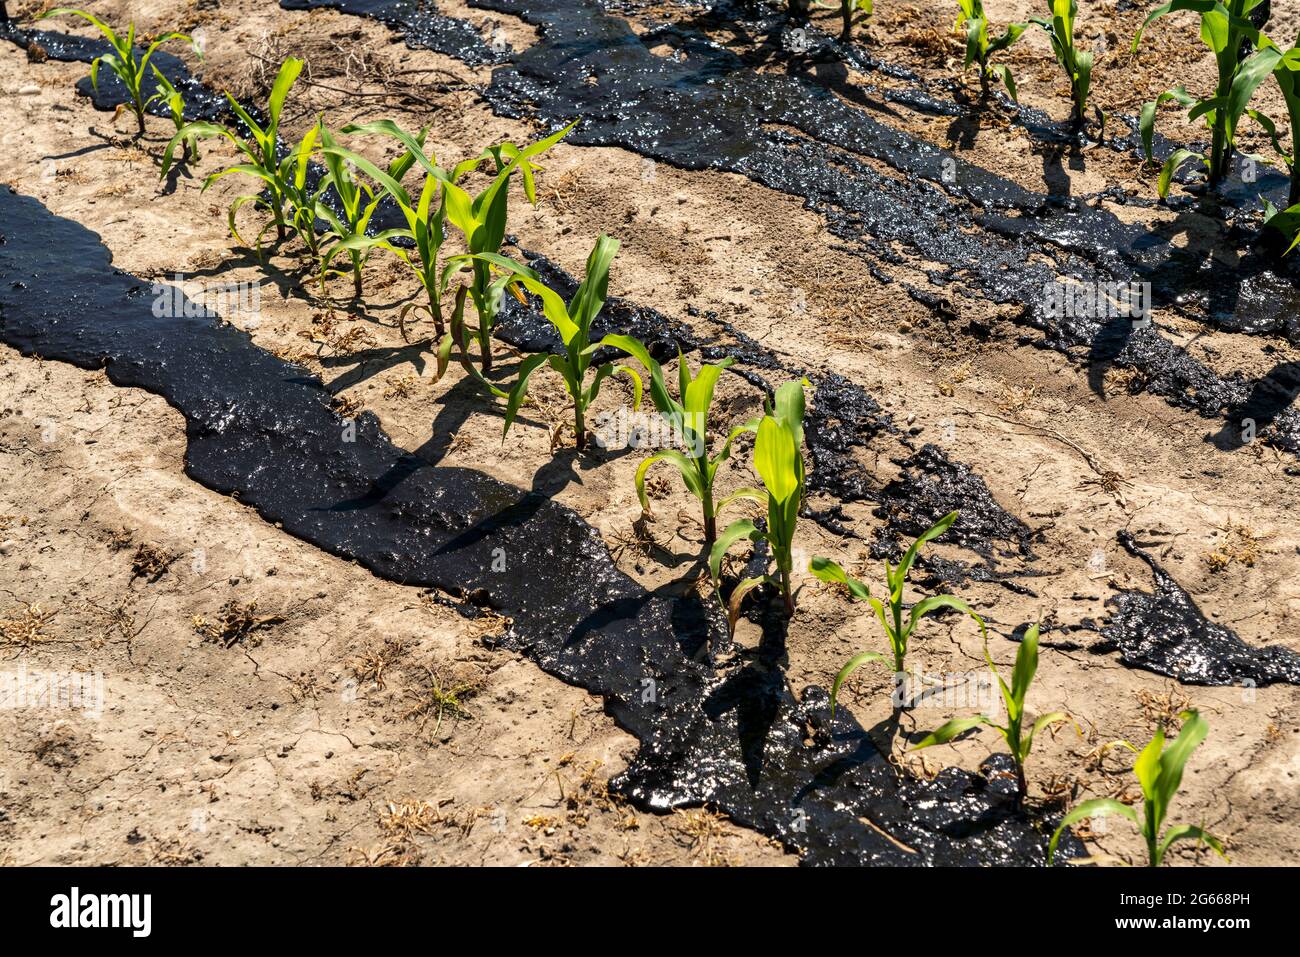 A maize field, with young plants, is fertilised with manure, near Geldern, NRW, Germany, Stock Photo